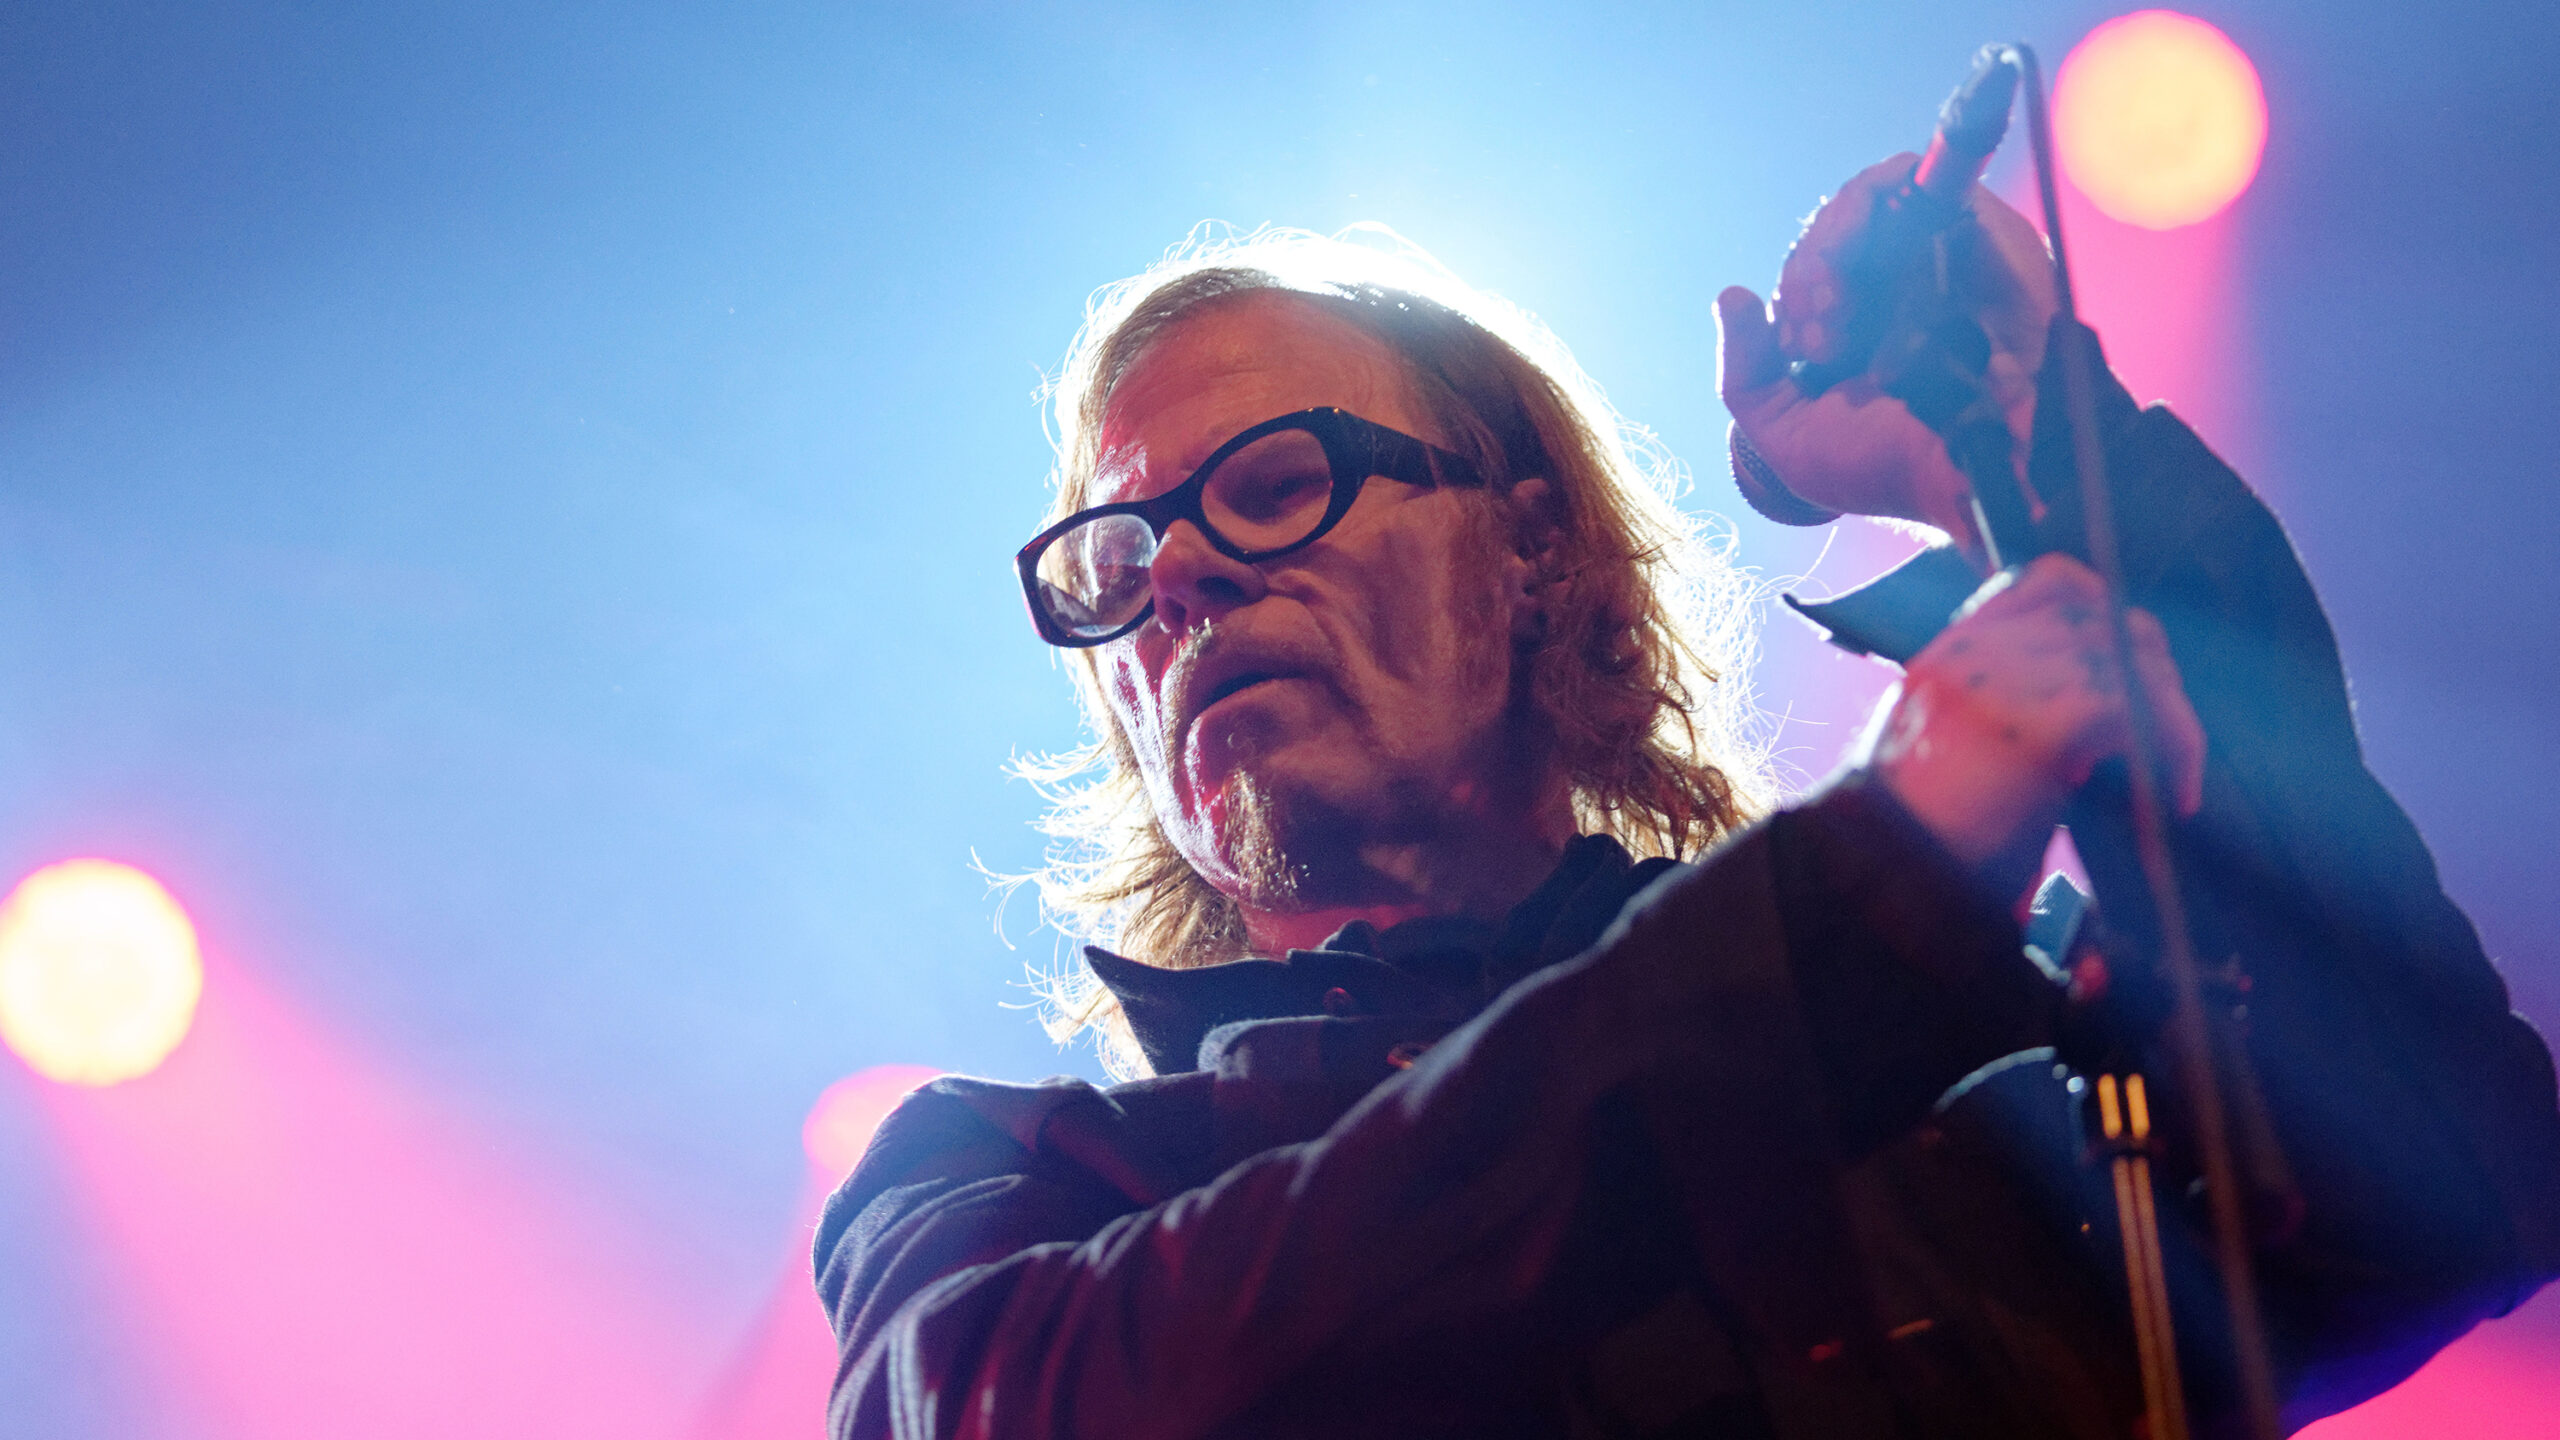 Featured image for “Mark Lanegan, Screaming Trees singer and voracious collaborator, dies at 57”